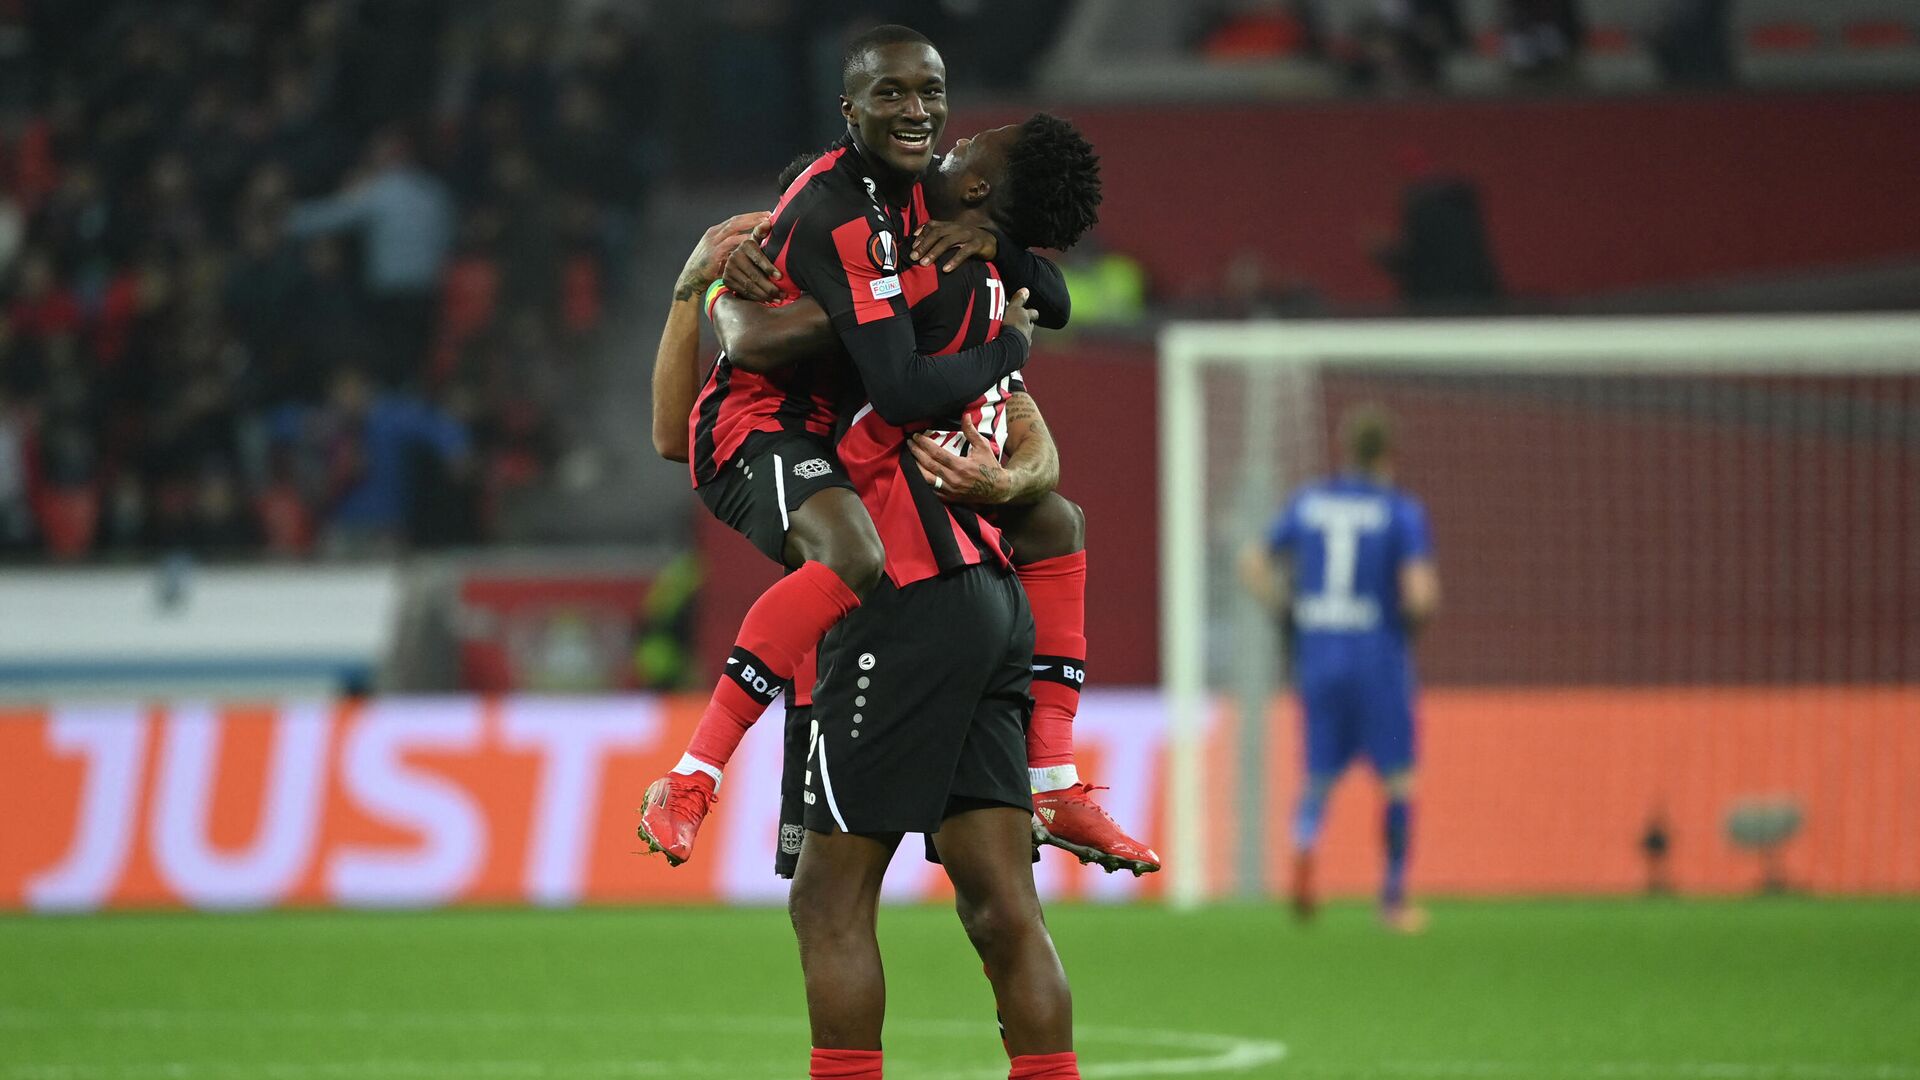 Leverkusen's French forward Moussa Diaby (Up) celebrates with Leverkusen's Burkinabe defender Edmond Tapsoba scoring the 2-0 during the UEFA Europa League Group G football match  Bayer 04 Leverkusen v Real Betis in Leverkusen, western Germany, on November 4, 2021. (Photo by Ina Fassbender / AFP) - РИА Новости, 1920, 05.11.2021